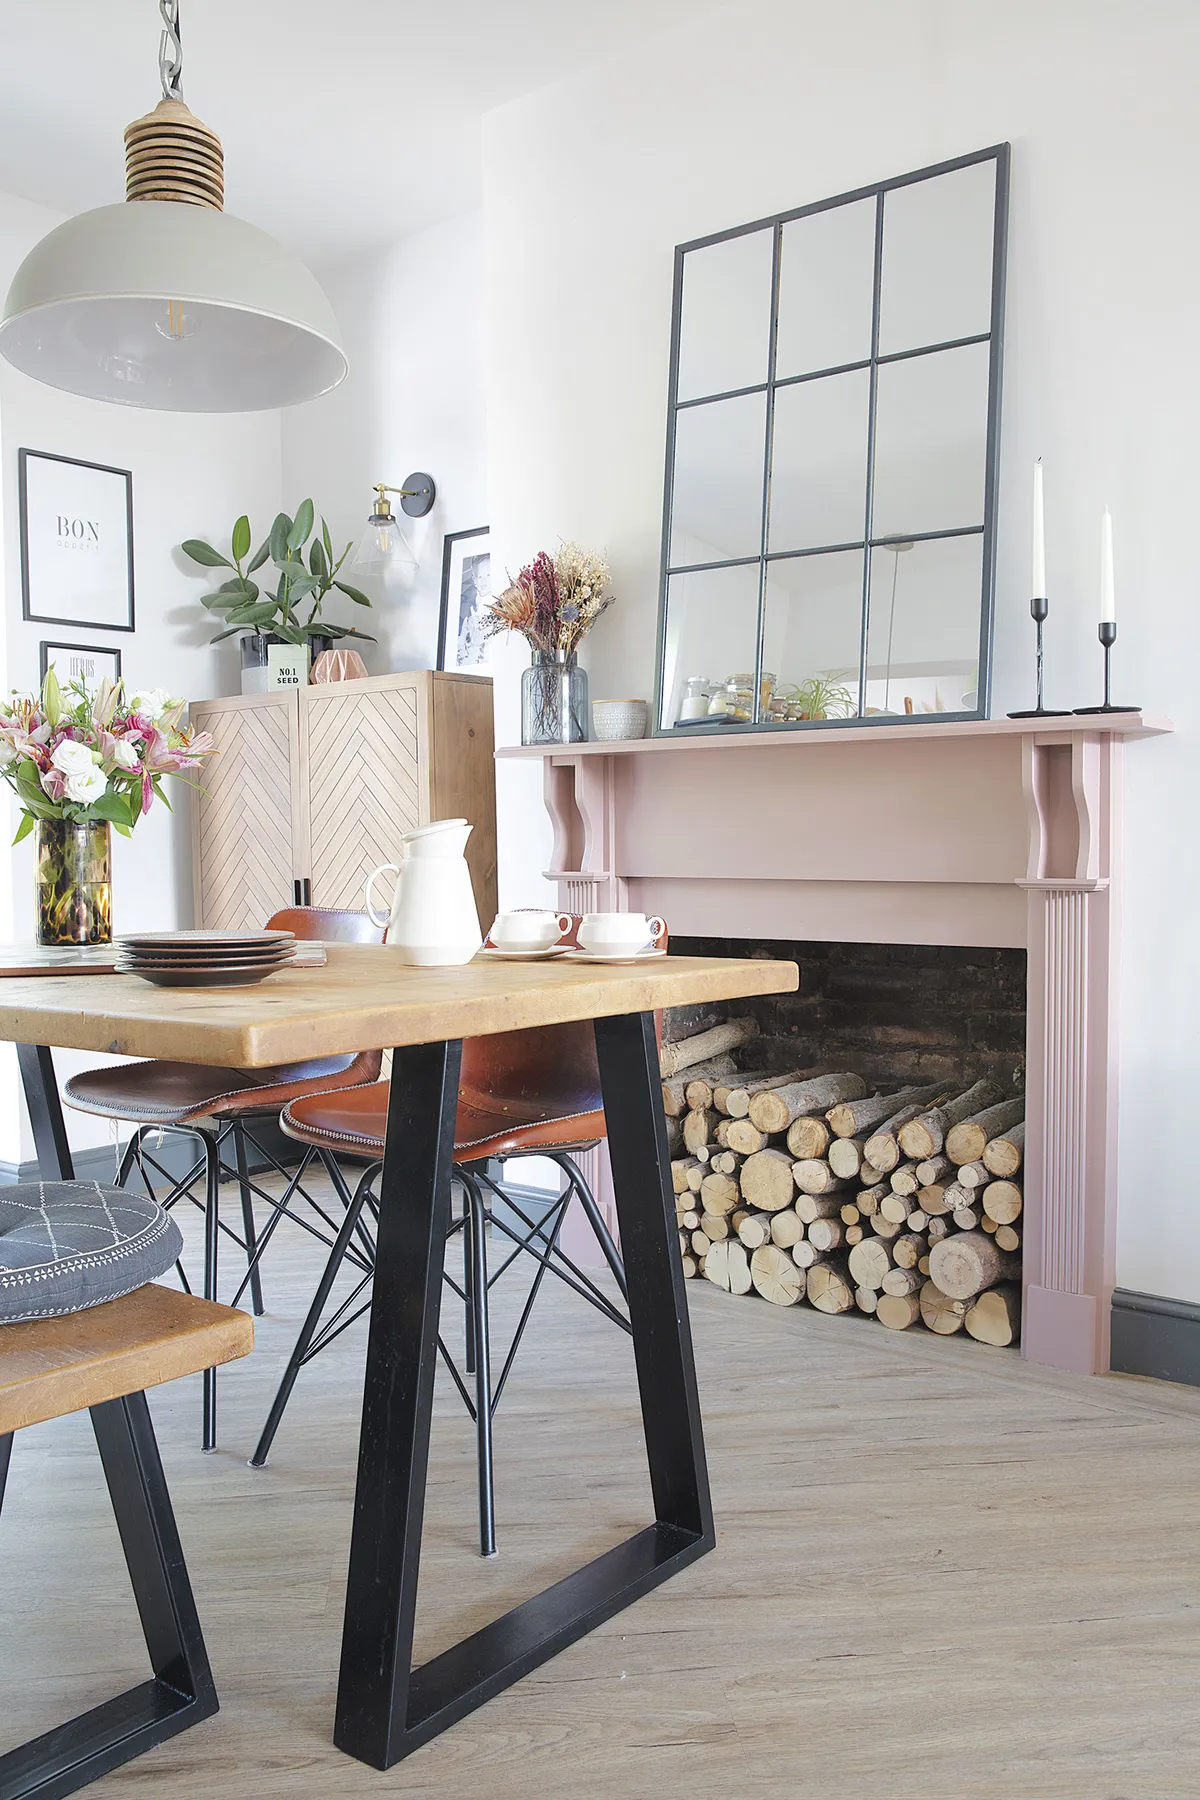 ‘The fireplace is the only thing we kept,’ says Laura. ‘I just love Sulking Room Pink by Farrow & Ball and when I painted it, it brought the whole room to life. The herringbone cabinet from La Redoute in the alcove is great for storing papers and toys too’